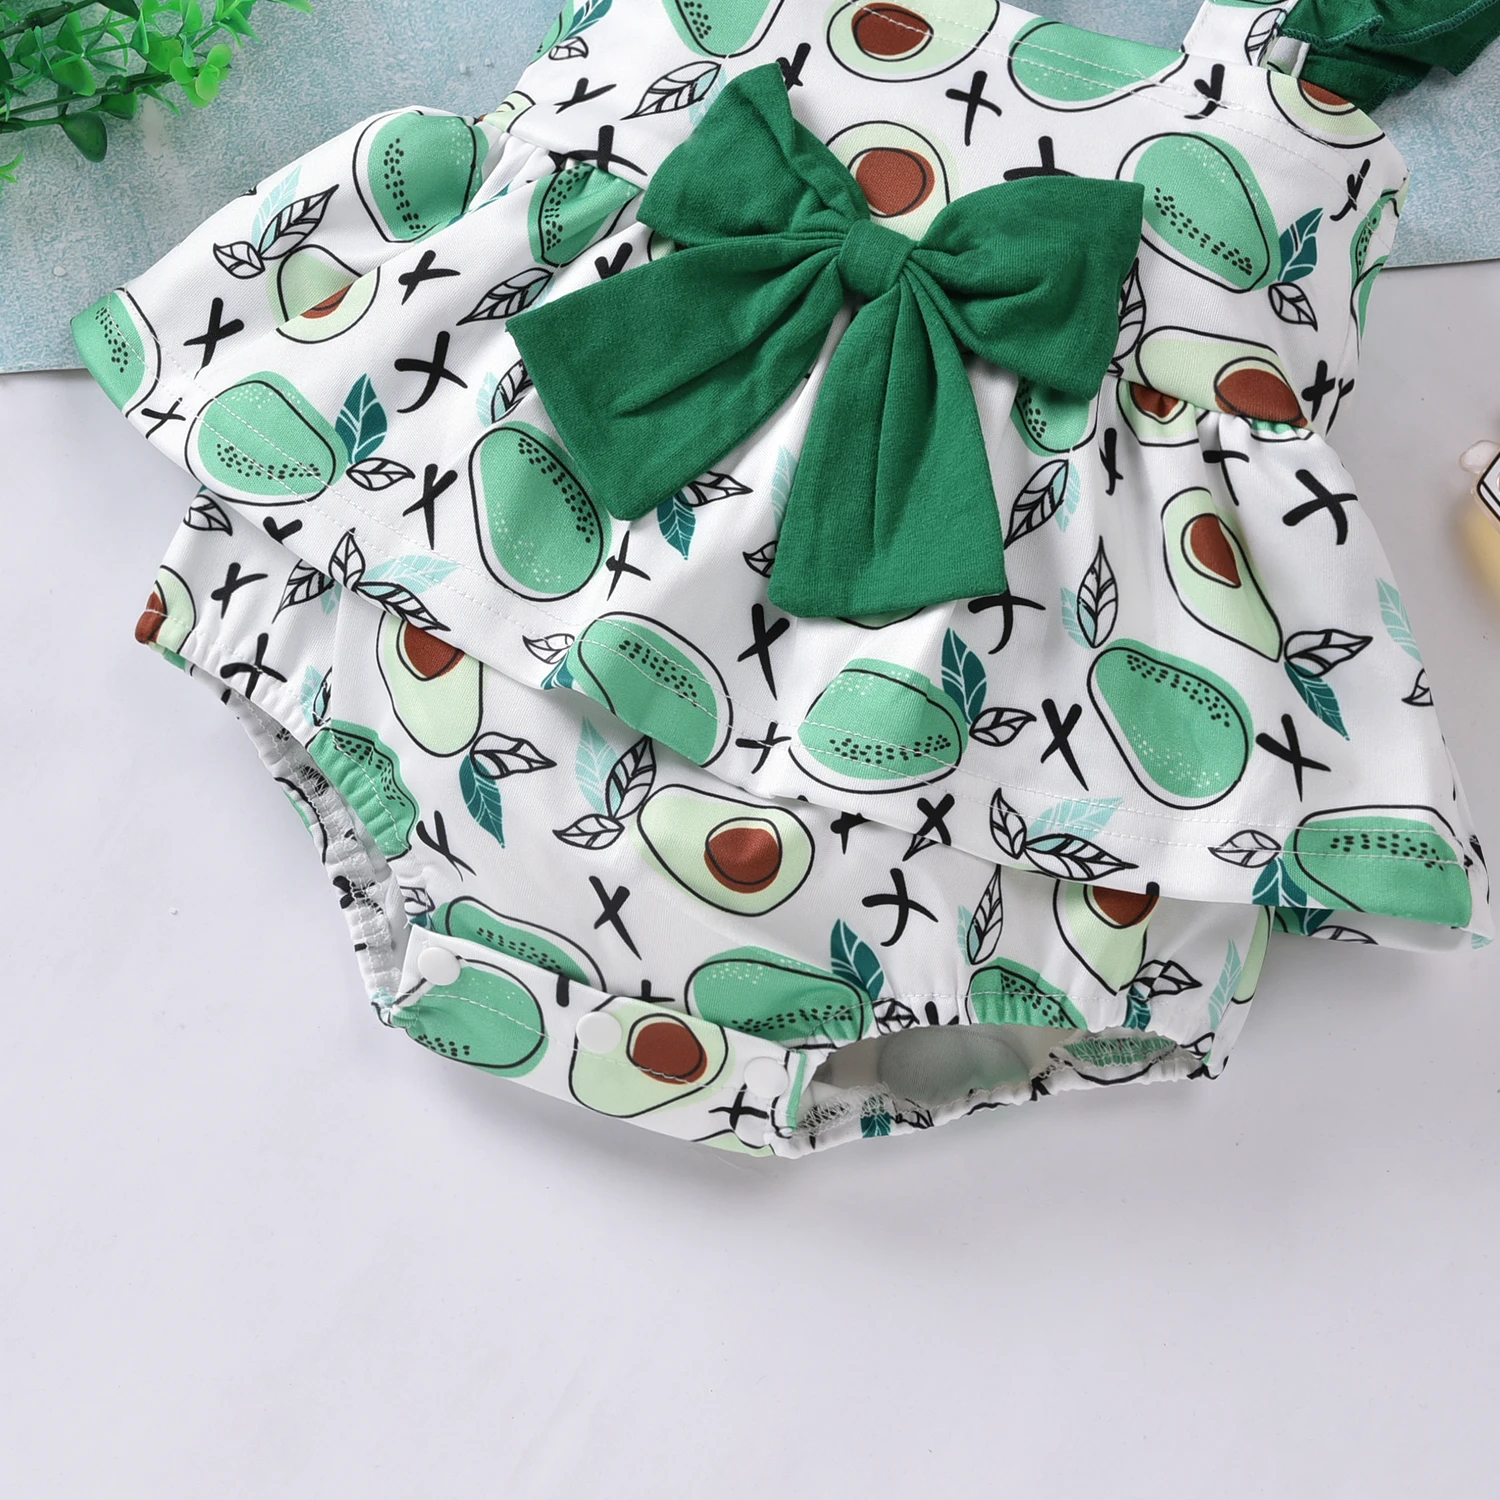 Summer Baby Girls Lovely Rompers 0-12M Flowers/Fruit Printed Ruffles Short Sleeve Big Bowknot Jumpsuits Baby Bodysuits cheap